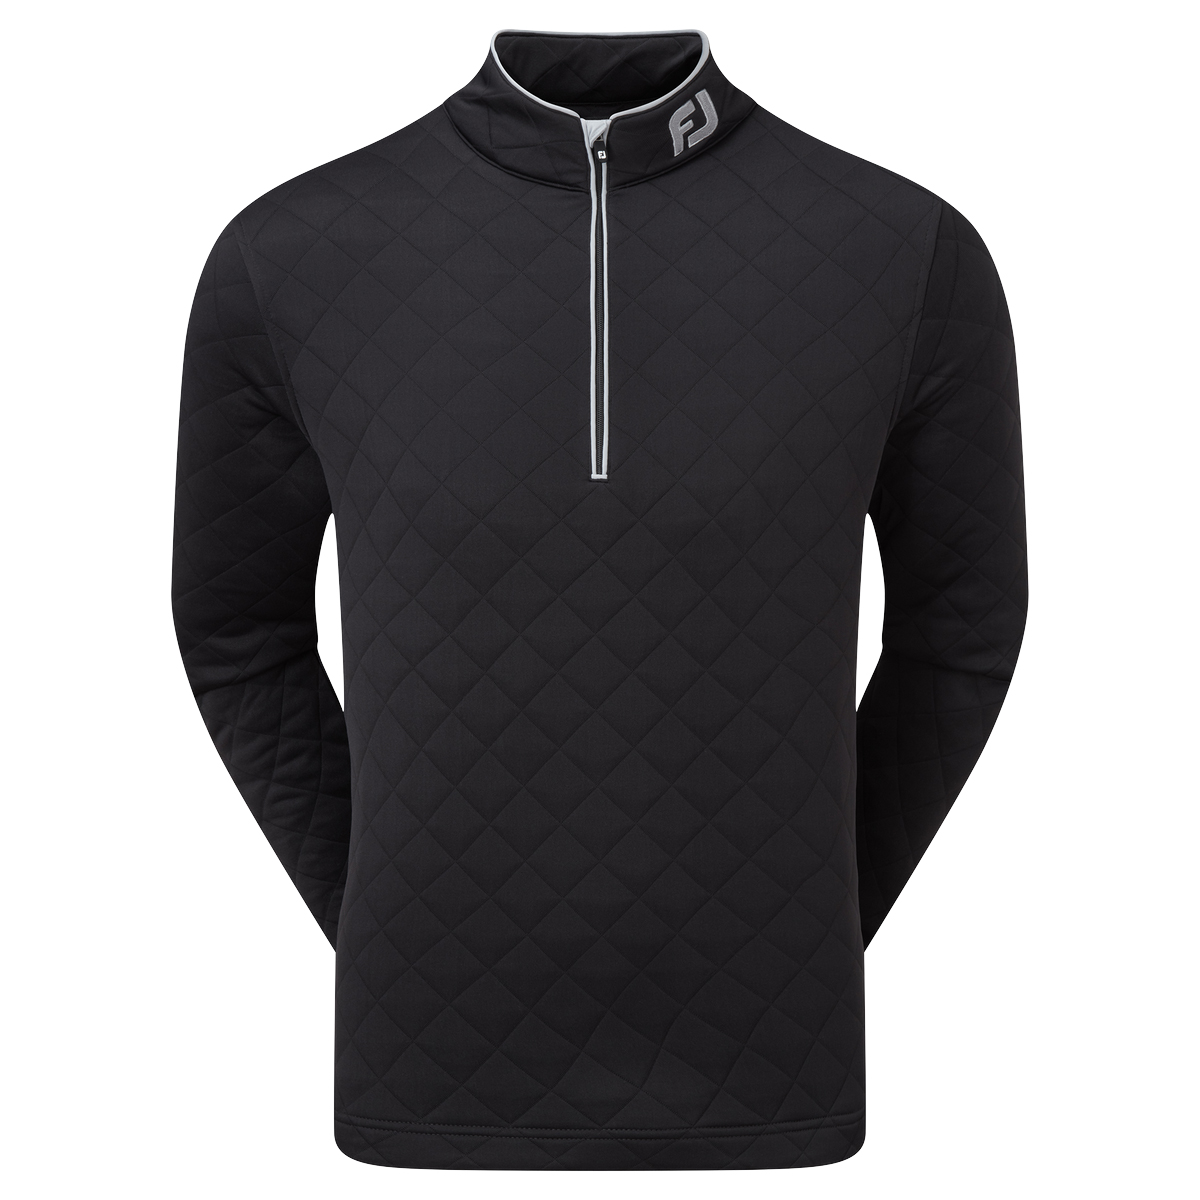 FootJoy Mens Diamond Jacquard Chill-Out Golf Mid-Layer Pullover  - Black/Grey